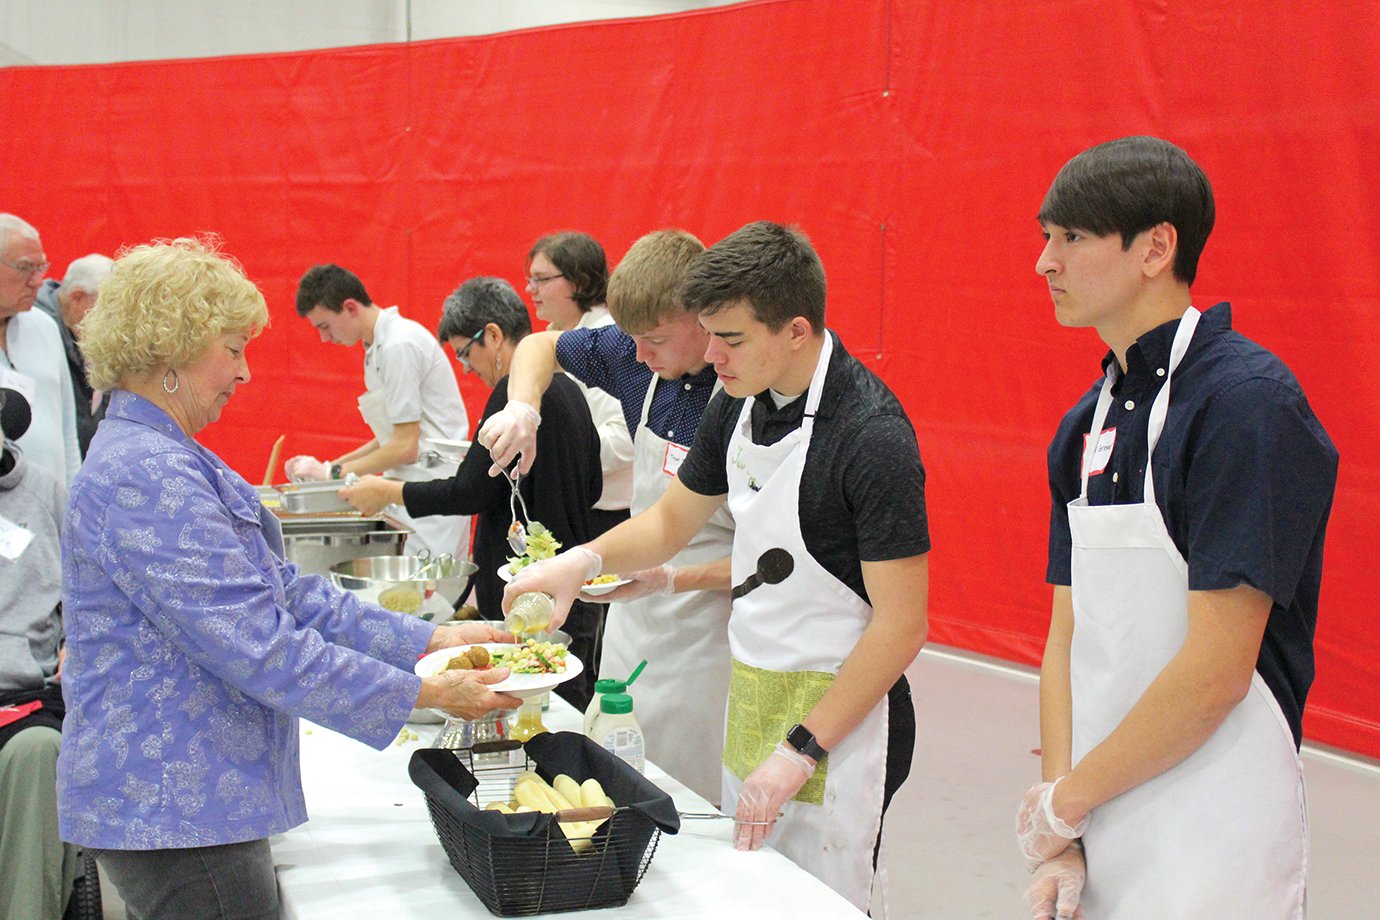 JoAnn Russell, left, is served Wednesday by Interact Club members Taishi Greiner, from right, Levi Brush, Trent Jones, Jacob Pike and Justin Bachmann, all seniors in the Southmont Interact Club, a teen satellite group of Crawfordsville Rotary. The five seniors arrived at Juniper Spoon, the day’s official caterer, early Wednesday morning to prepare the meal.